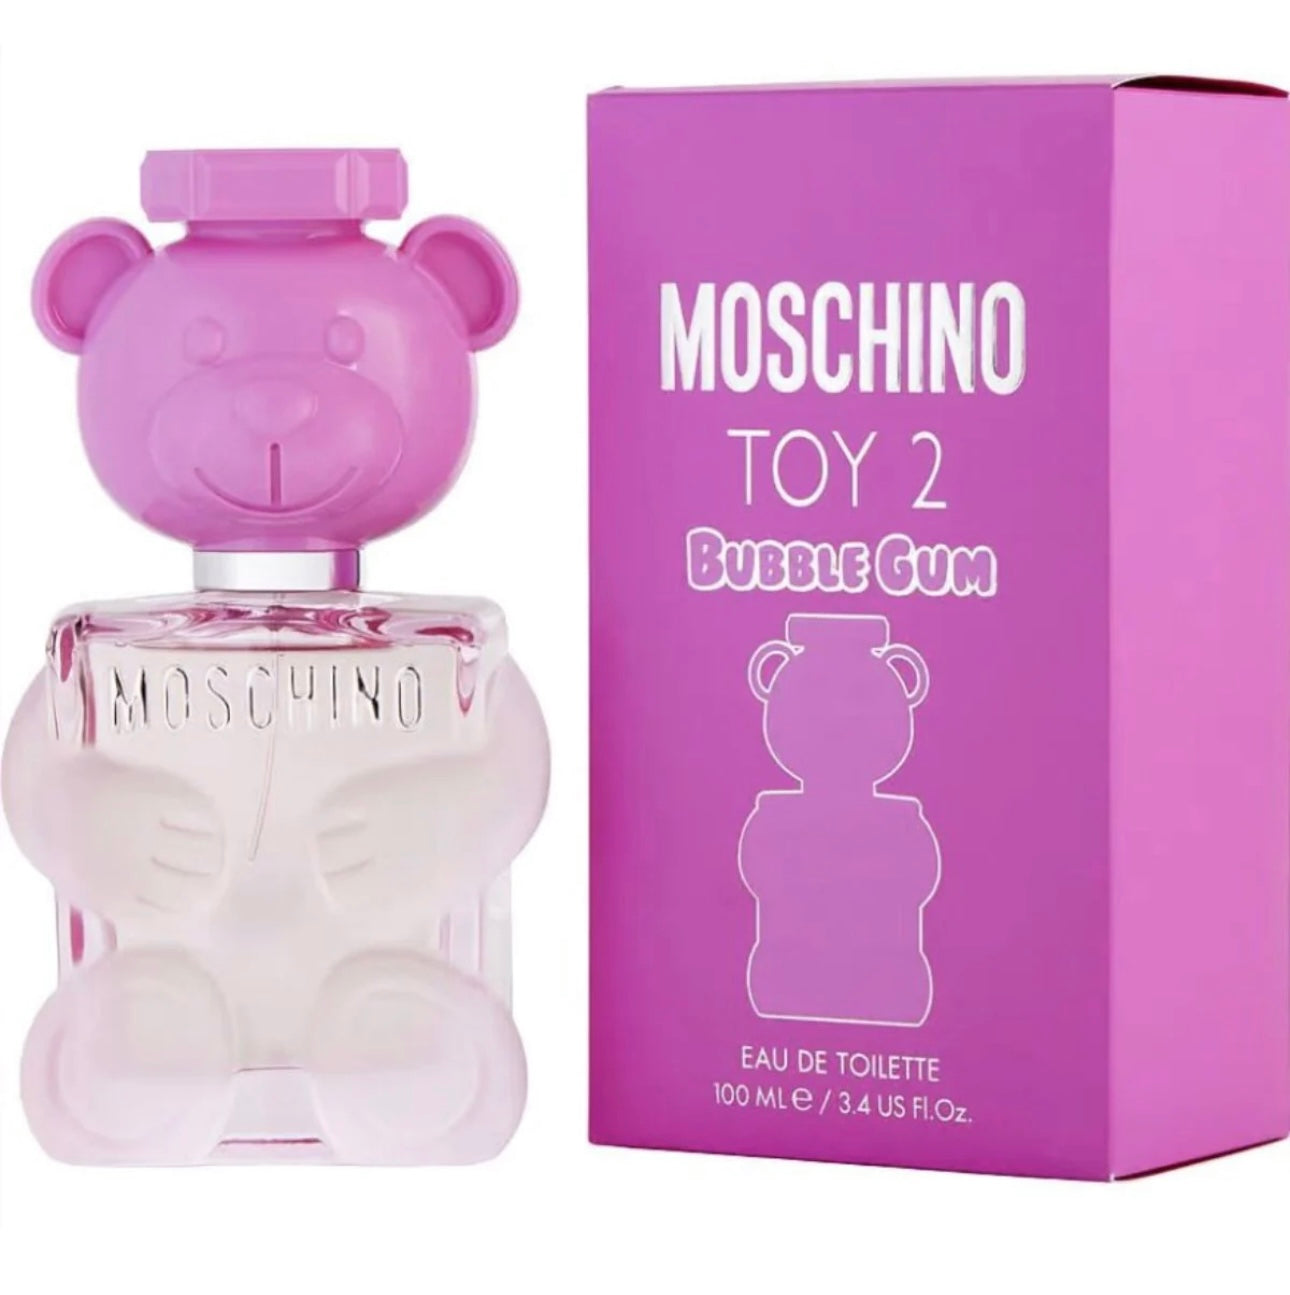 Moschino Toy 2 Bubble Gum EdT